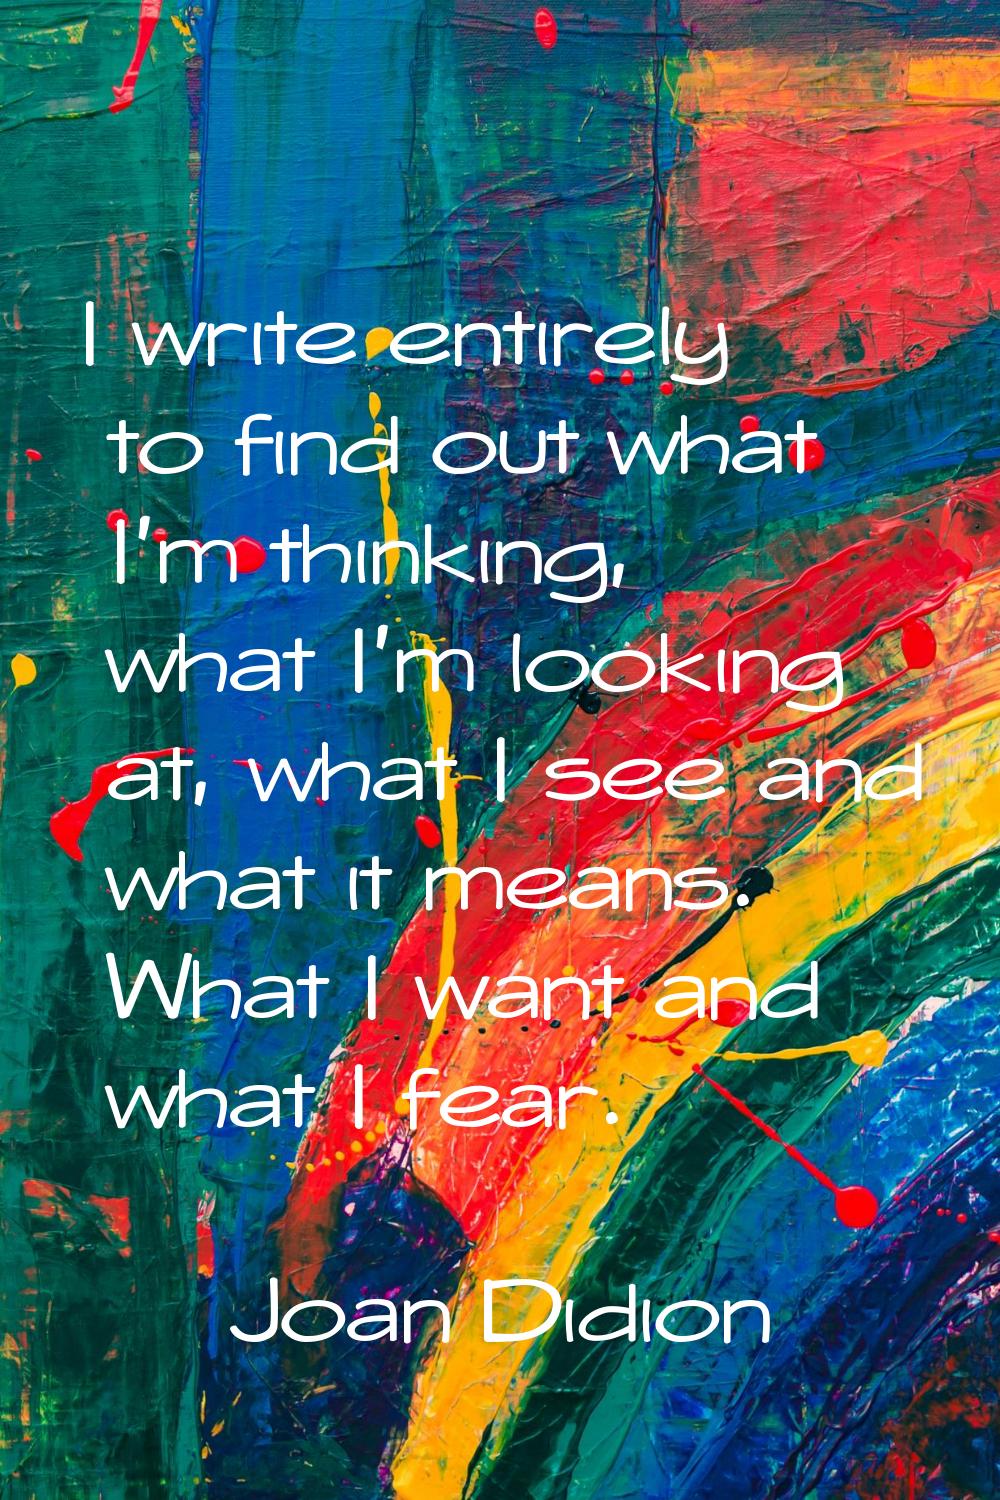 I write entirely to find out what I'm thinking, what I'm looking at, what I see and what it means. 